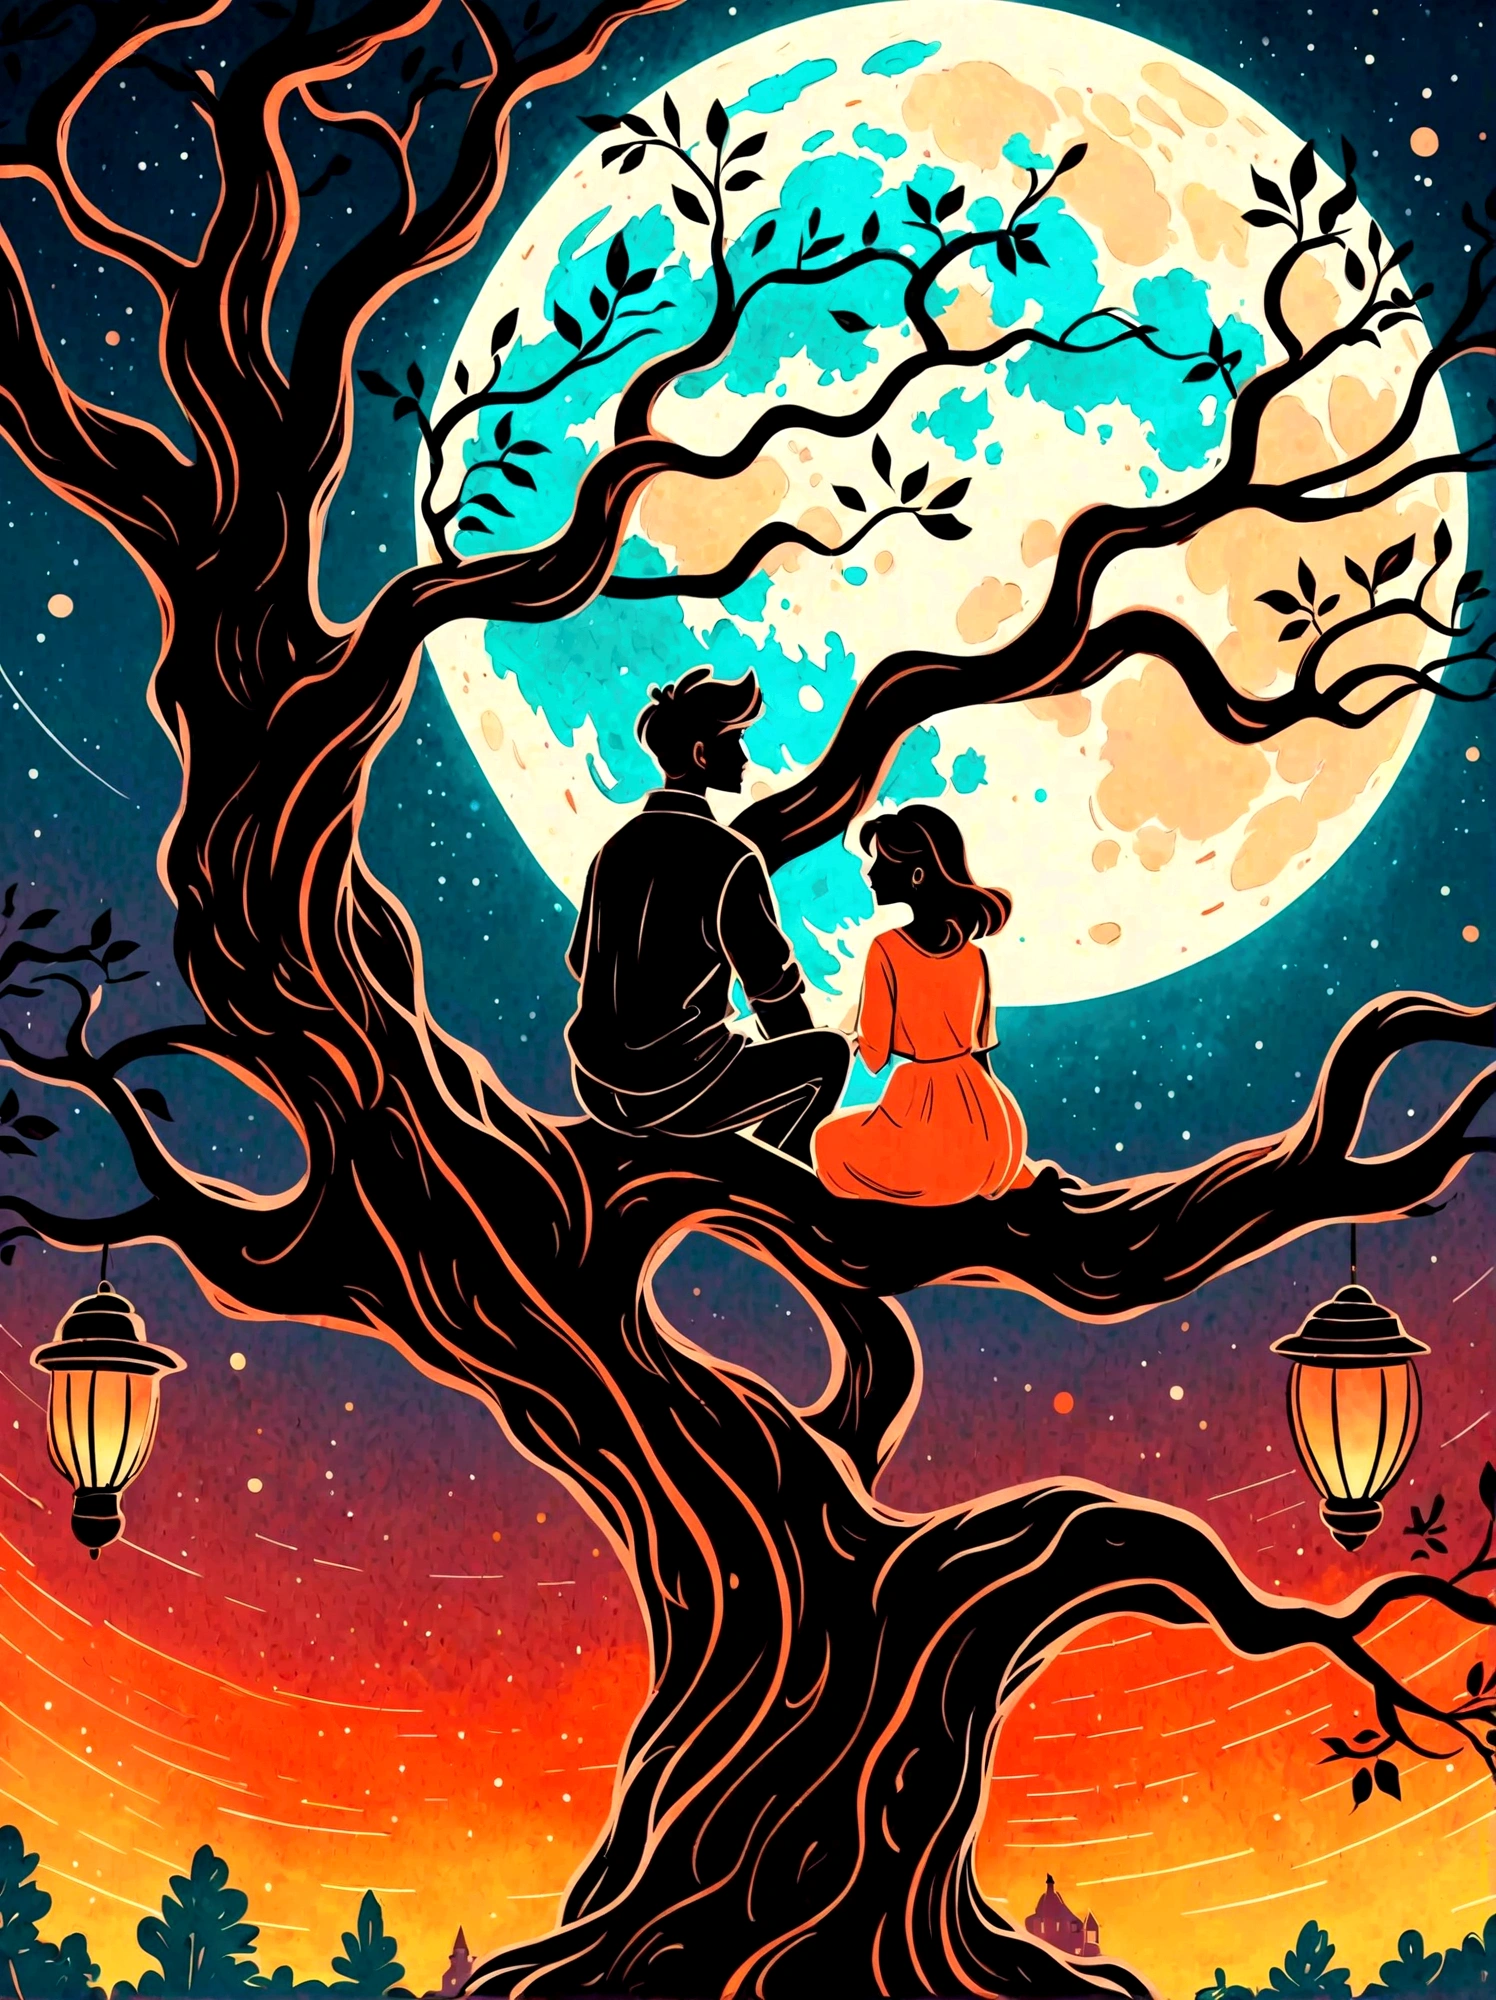 Cartoon hand drawn, Romantic ancient style，night，Backlight，A man and a woman sitting on a tree branch，There is a full moon behind，Alexander，repeat，Fresh colors，Soft colors，Diode lamp，Concept art style，extremely intricate details，Clear distinction between light and dark，Layering，Ultra high quality, Magical naive art，Bright blue and green，The color palette is in red, orange and black tones and has a sketchy style, The background should have a simple hand-drawn doodle pattern, 1shxx1